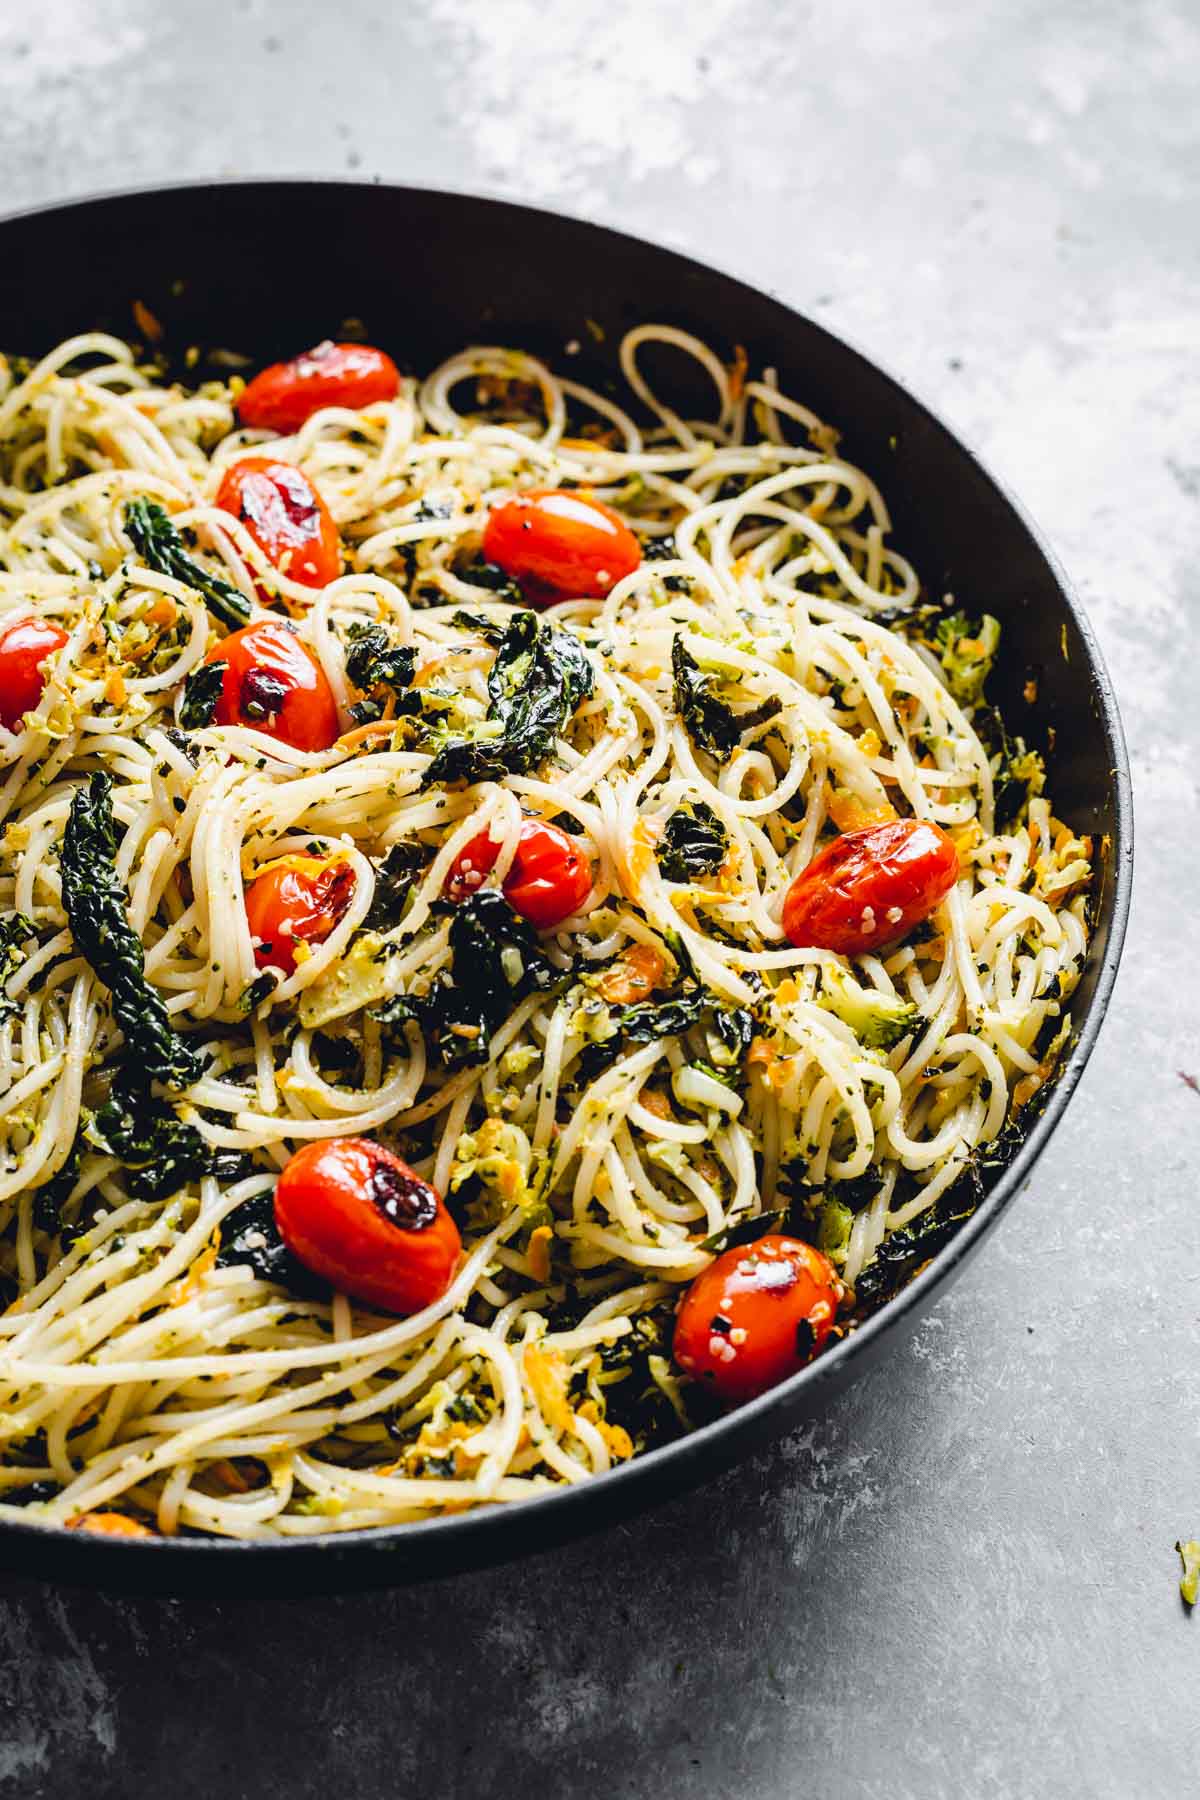 A side view of cavolo nero pasta with small plum tomatoes in a large black pan.